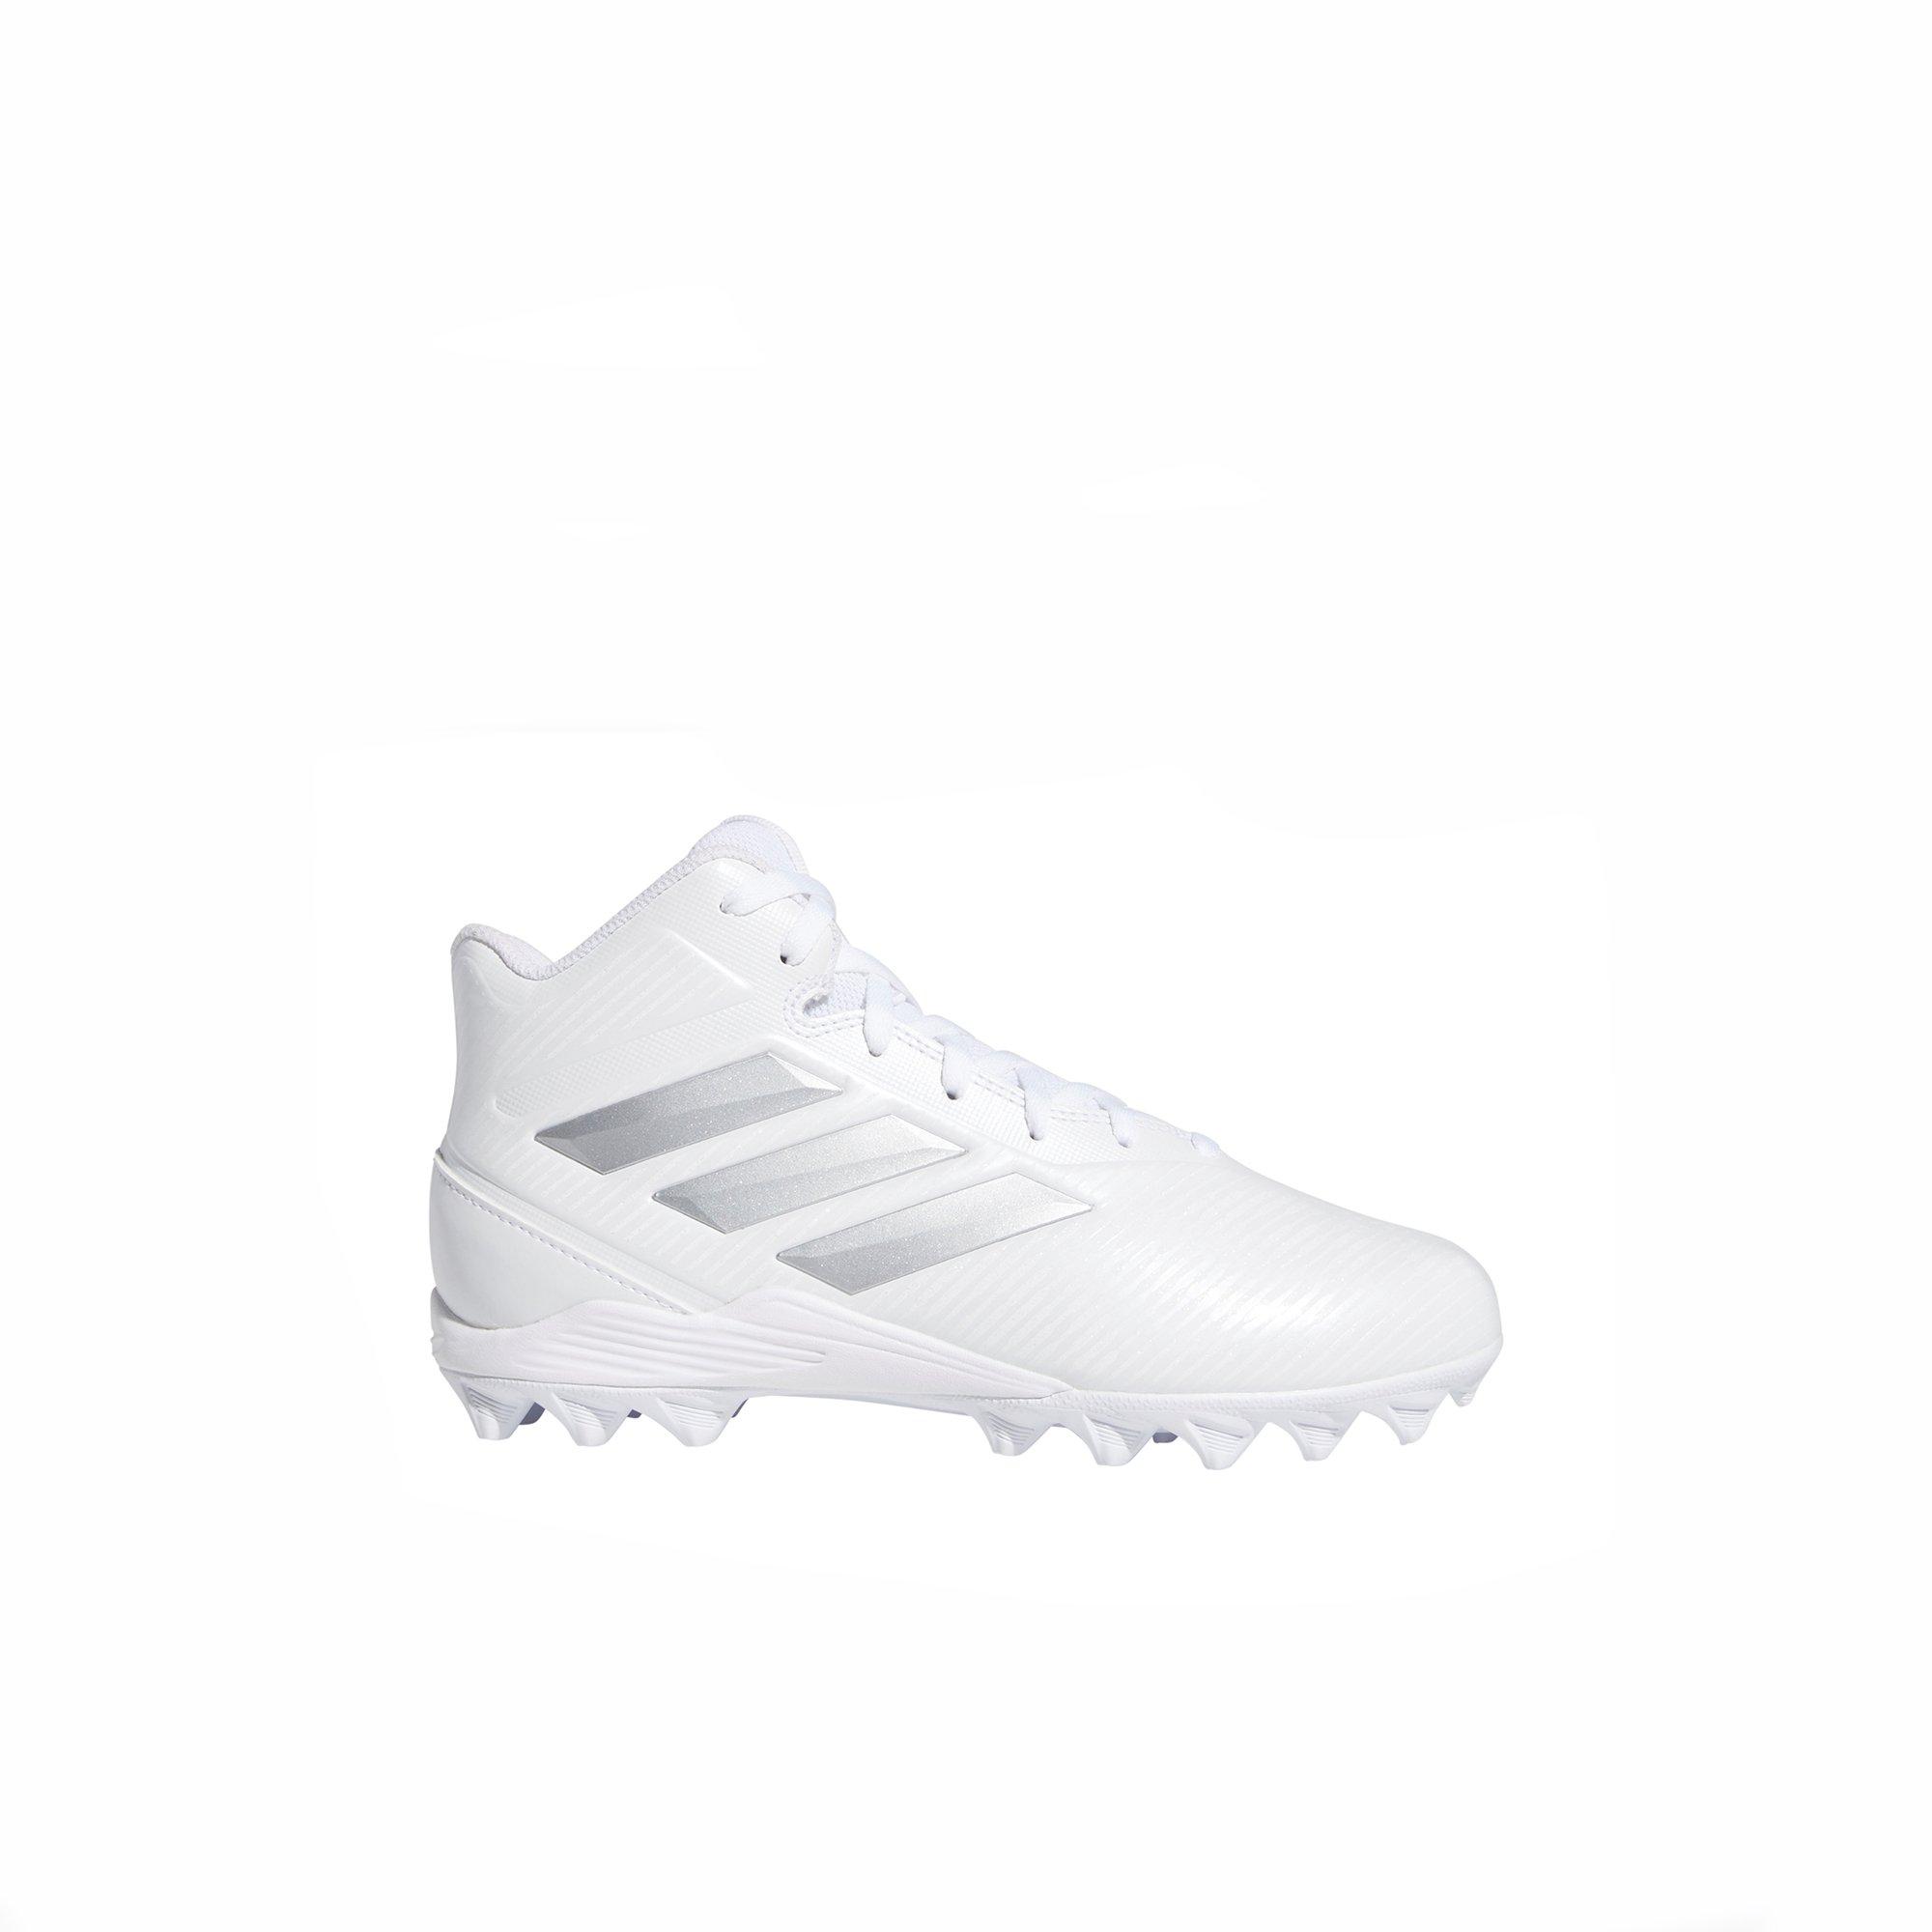 toddler football cleats size 10c online